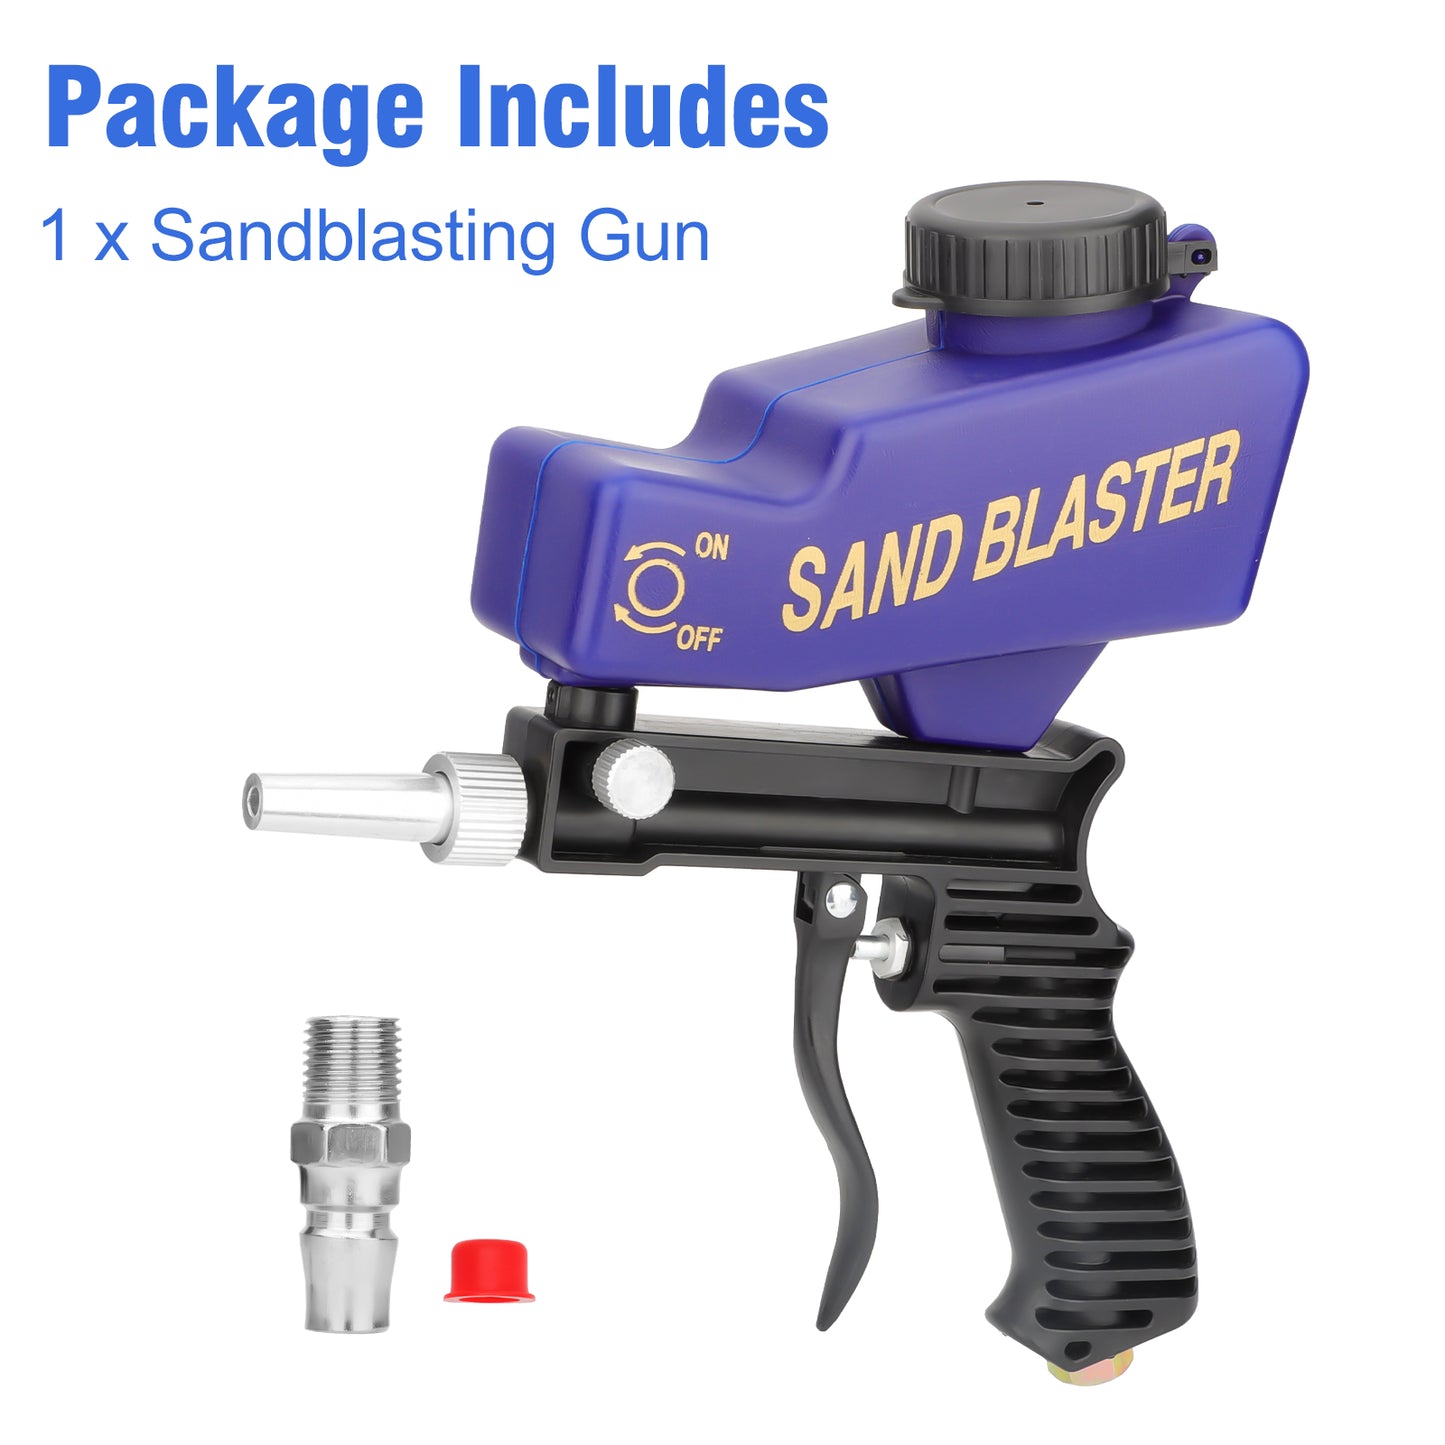 Handheld Sandblasting Gun - Durable Alloy Steel Construction, Versatile Nozzle, Perfect for Rust Removal, Paint Stripping, and Grime Cleaning